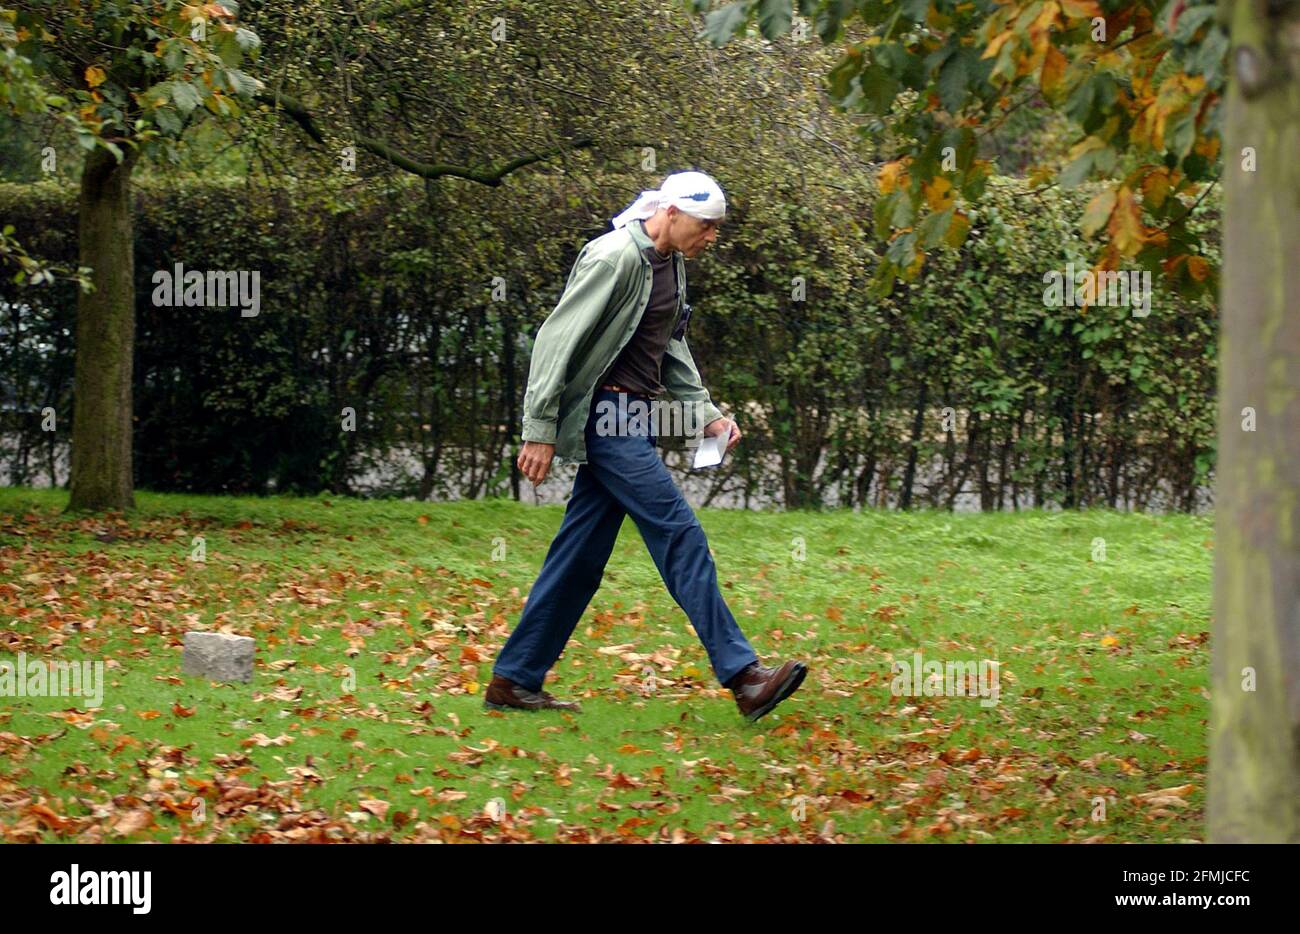 RICHARD LONG CREATING 'STONE TO STONE 2004' IN REGENTS PARK AS PART OF THE 'FREIZE ART' FESTIVAL.12/10/04 PILSTON Stock Photo